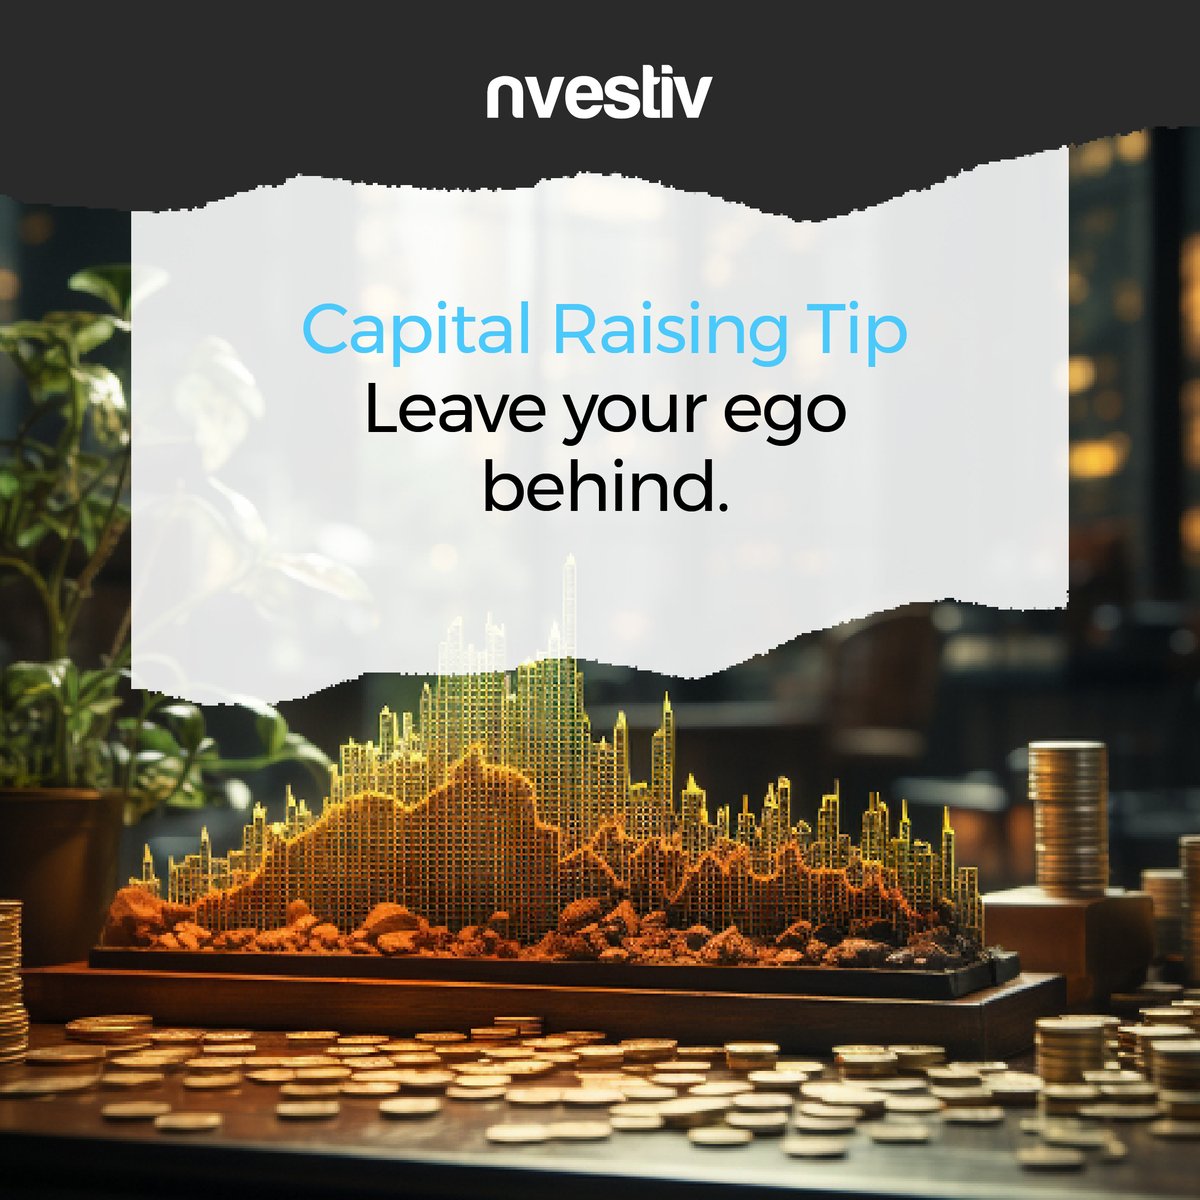 Your ego can be a stumbling block on the road to securing investments. We advise leaving it behind.  Humility opens doors, fosters collaboration, and builds trust with investors. Focus on your vision - not your ego.
#capitalraising #investmenttips  #nvestiv #everybodyknowsnvestiv